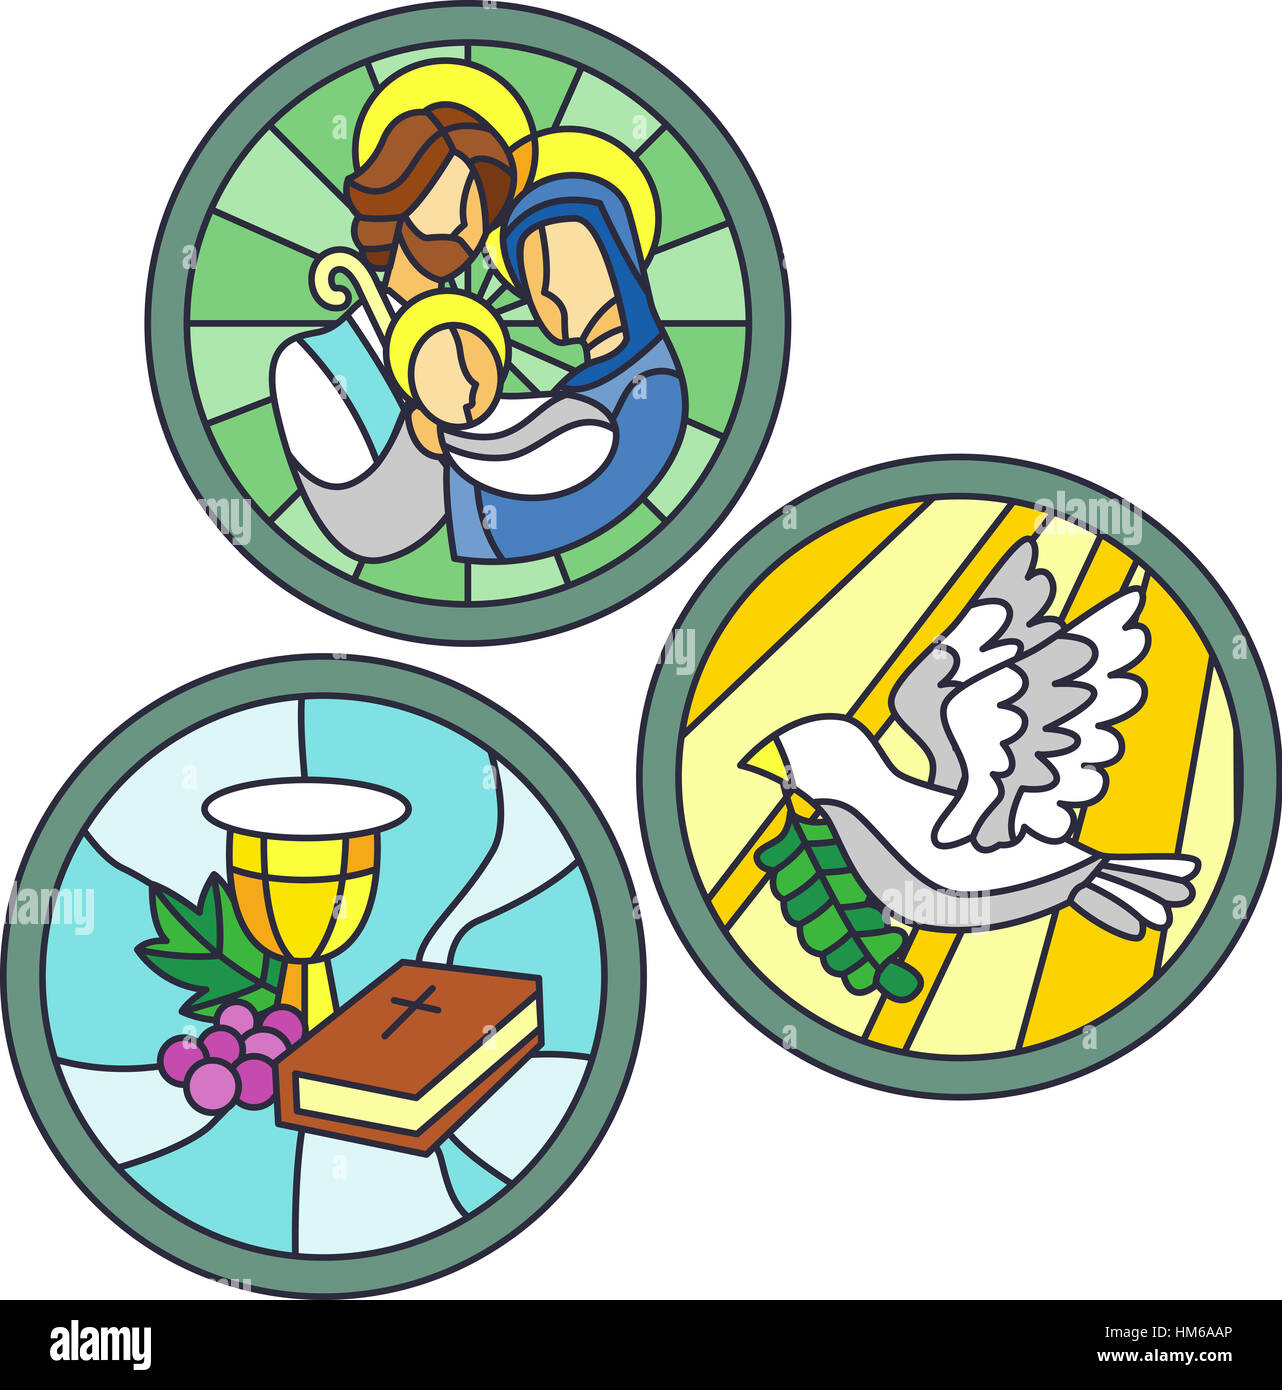 Stained Glass Illustration Featuring Christian Symbols Stock Photo